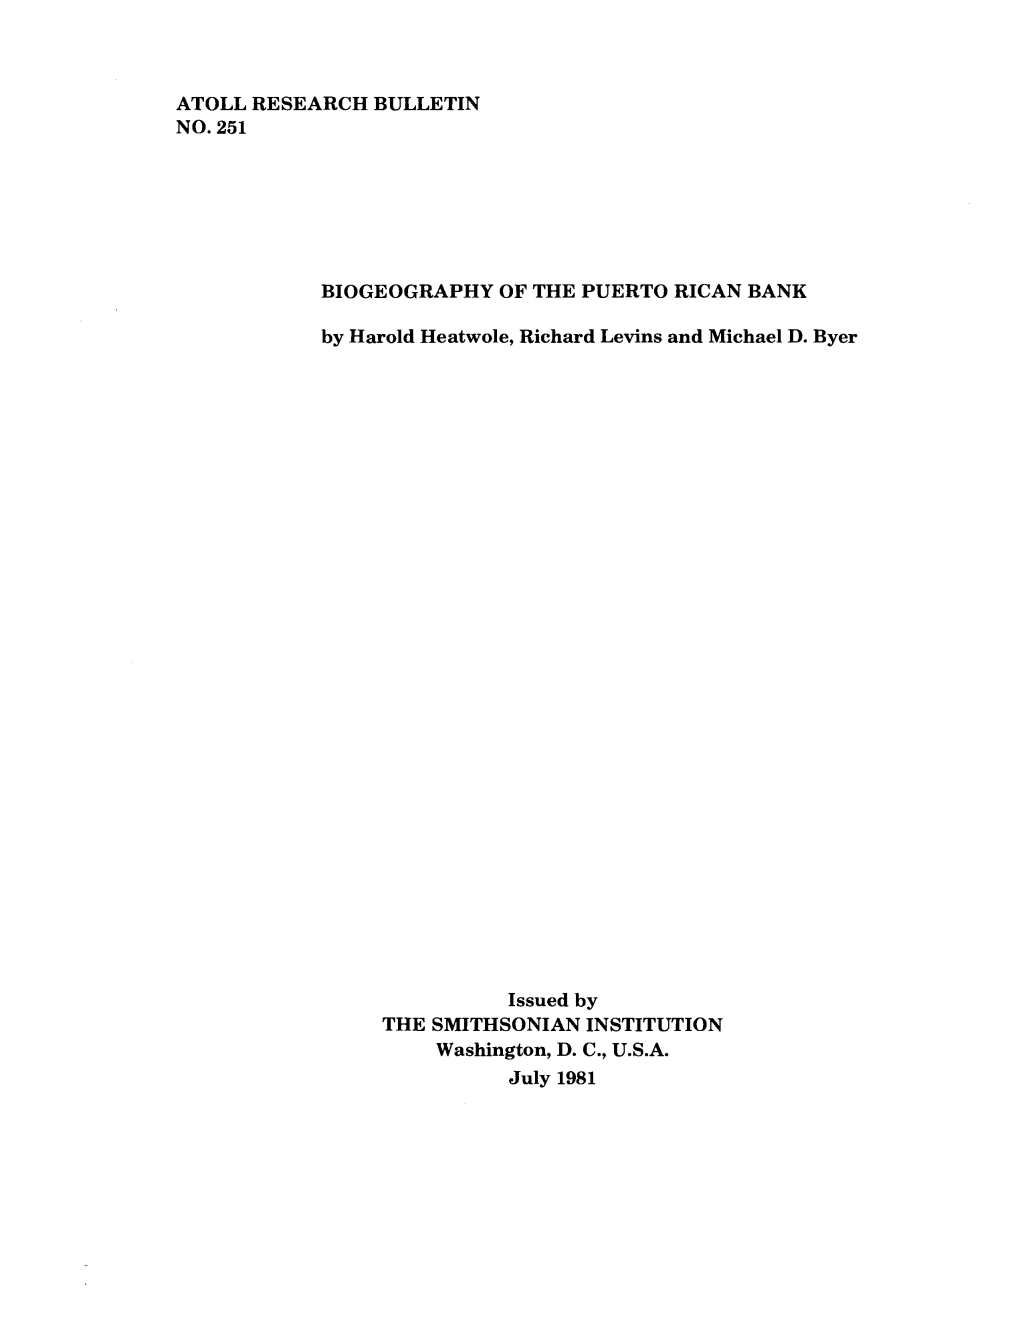 ATOLL RESEARCH BULLETIN NO. 251 BIOGEOGRAPHY of the PUERTO RICAN BANK by Harold Heatwole, Richard Levins and Michael D. Byer